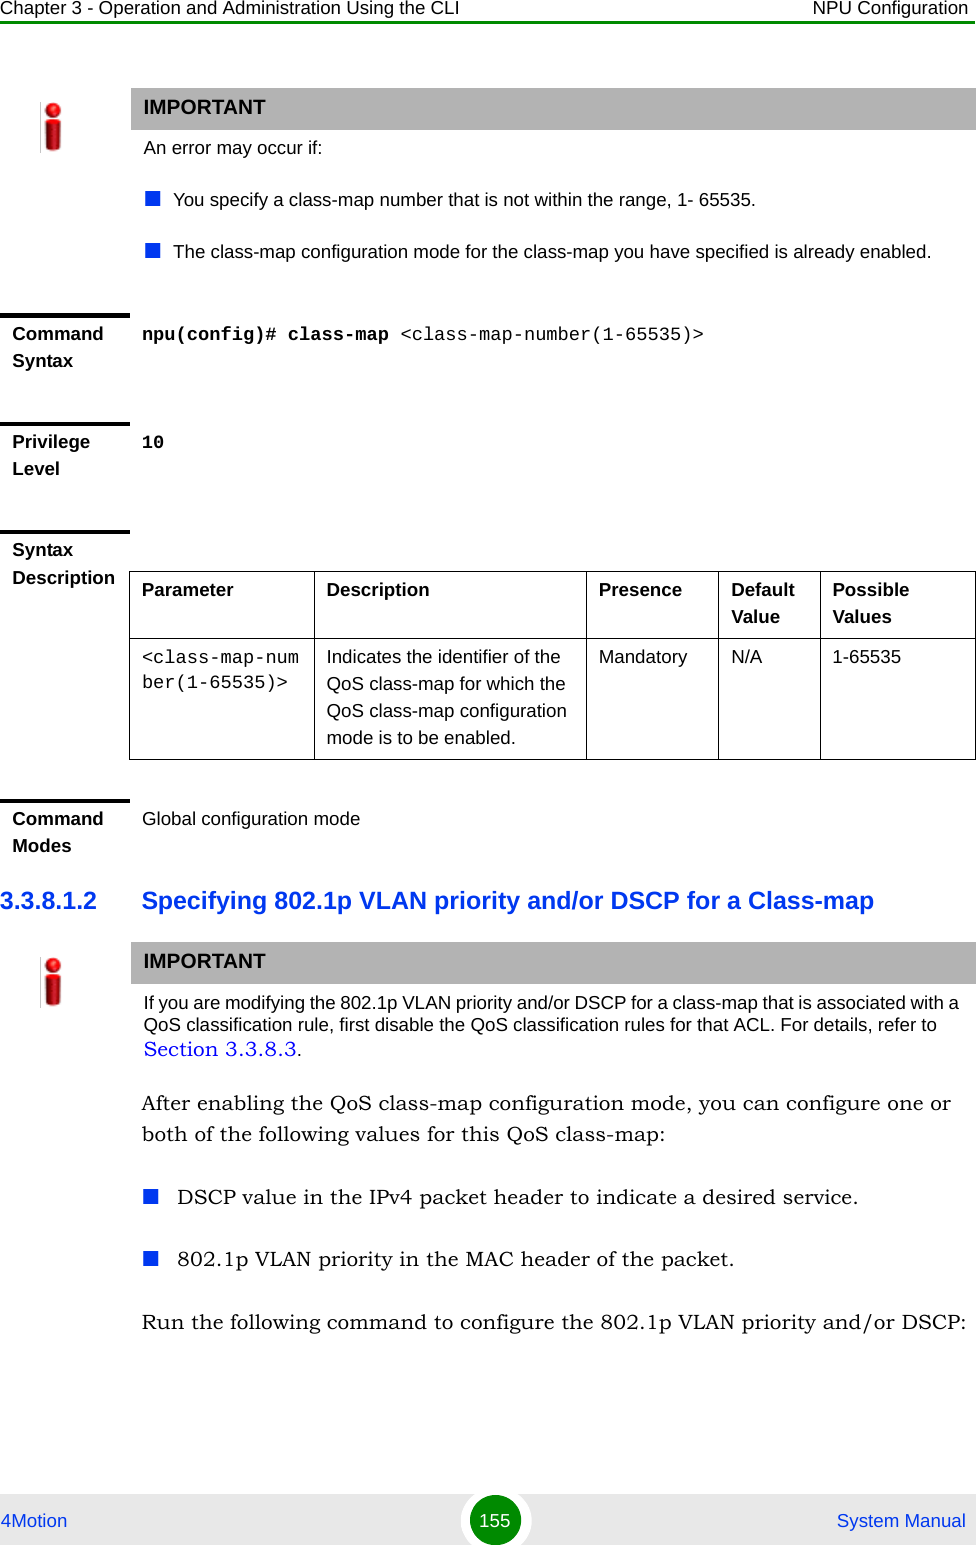 Chapter 3 - Operation and Administration Using the CLI NPU Configuration4Motion 155  System Manual3.3.8.1.2 Specifying 802.1p VLAN priority and/or DSCP for a Class-mapAfter enabling the QoS class-map configuration mode, you can configure one or both of the following values for this QoS class-map:DSCP value in the IPv4 packet header to indicate a desired service.802.1p VLAN priority in the MAC header of the packet.Run the following command to configure the 802.1p VLAN priority and/or DSCP: IMPORTANTAn error may occur if:You specify a class-map number that is not within the range, 1- 65535.The class-map configuration mode for the class-map you have specified is already enabled.Command Syntaxnpu(config)# class-map &lt;class-map-number(1-65535)&gt;Privilege Level10Syntax Description Parameter Description Presence Default ValuePossible Values&lt;class-map-number(1-65535)&gt;Indicates the identifier of the QoS class-map for which the QoS class-map configuration mode is to be enabled.Mandatory N/A 1-65535Command ModesGlobal configuration modeIMPORTANTIf you are modifying the 802.1p VLAN priority and/or DSCP for a class-map that is associated with a QoS classification rule, first disable the QoS classification rules for that ACL. For details, refer to Section 3.3.8.3.